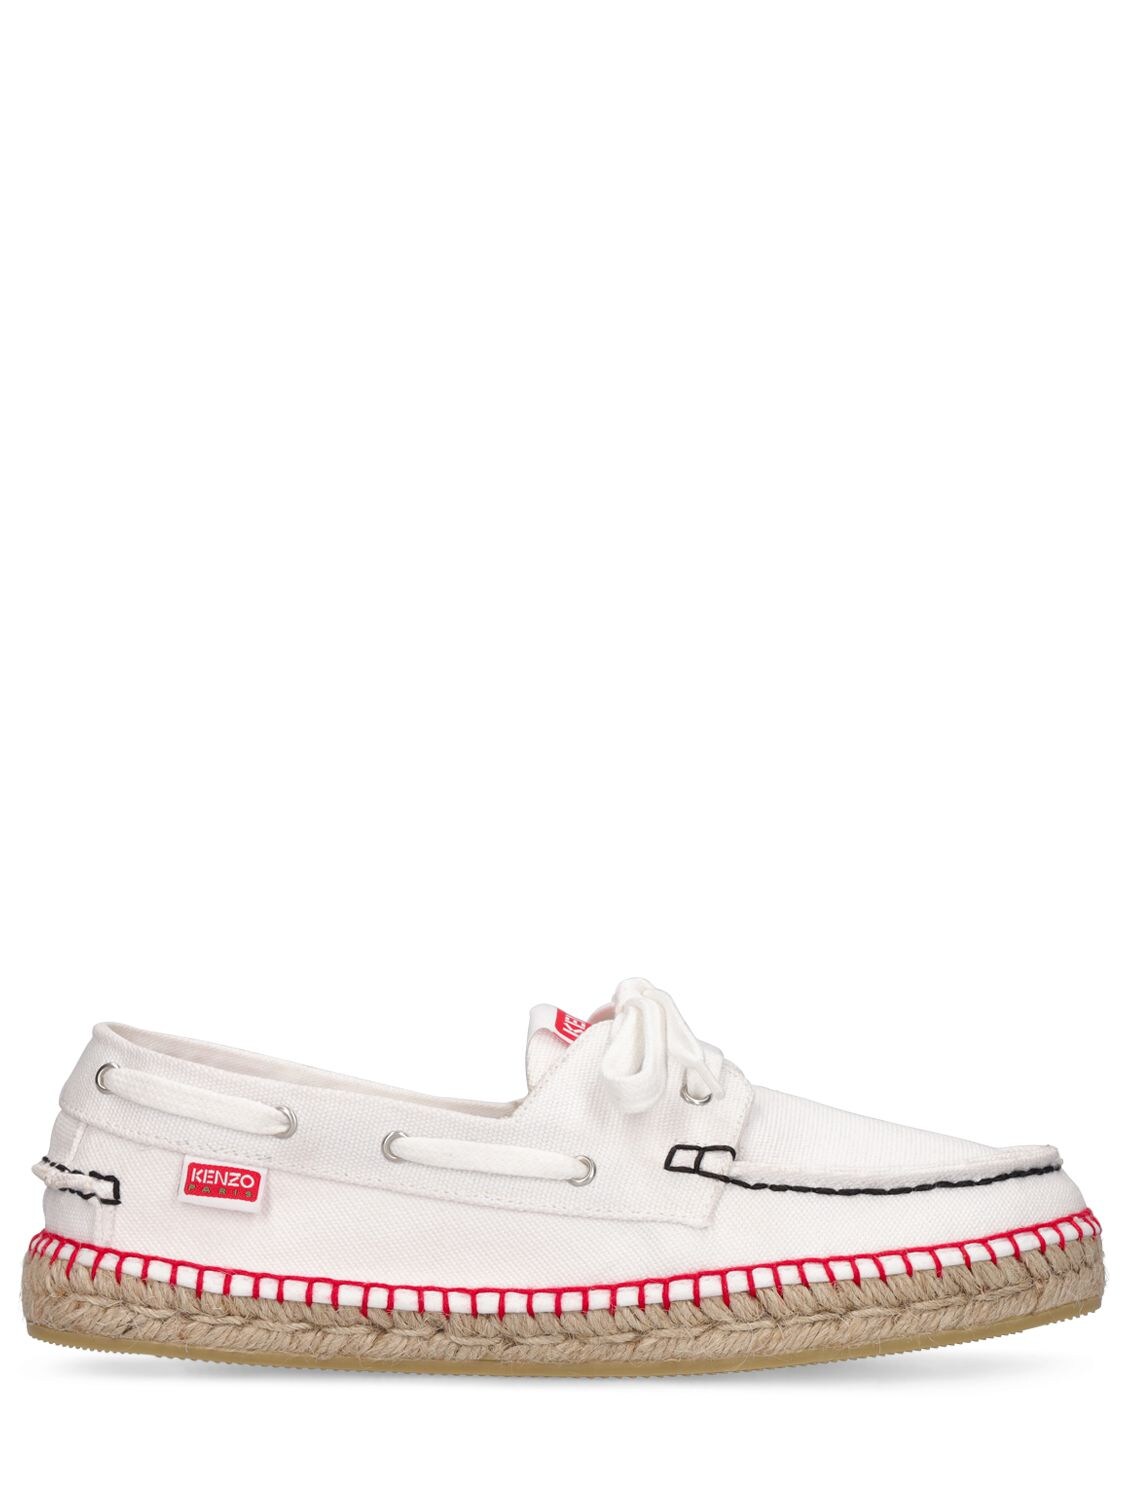 Kenzo 20mm Marine Cotton Boat Loafers In White